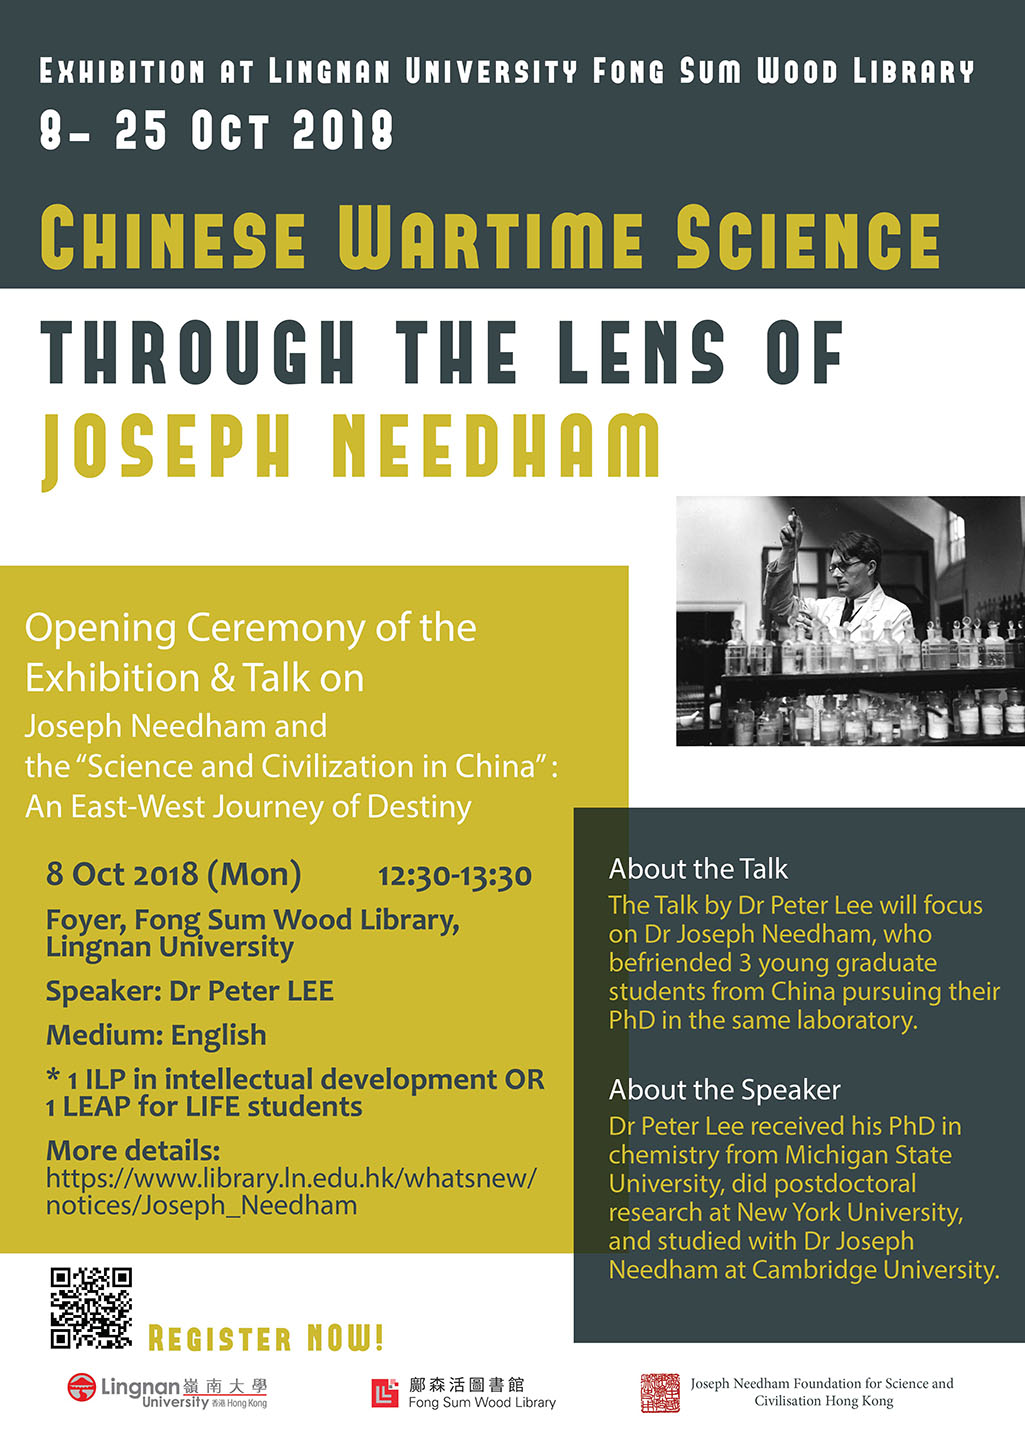  Opening Ceremony of the Exhibition & Talk on Joseph Needham and the “Science and Civilization in China”: An East-West Journey of Destiny